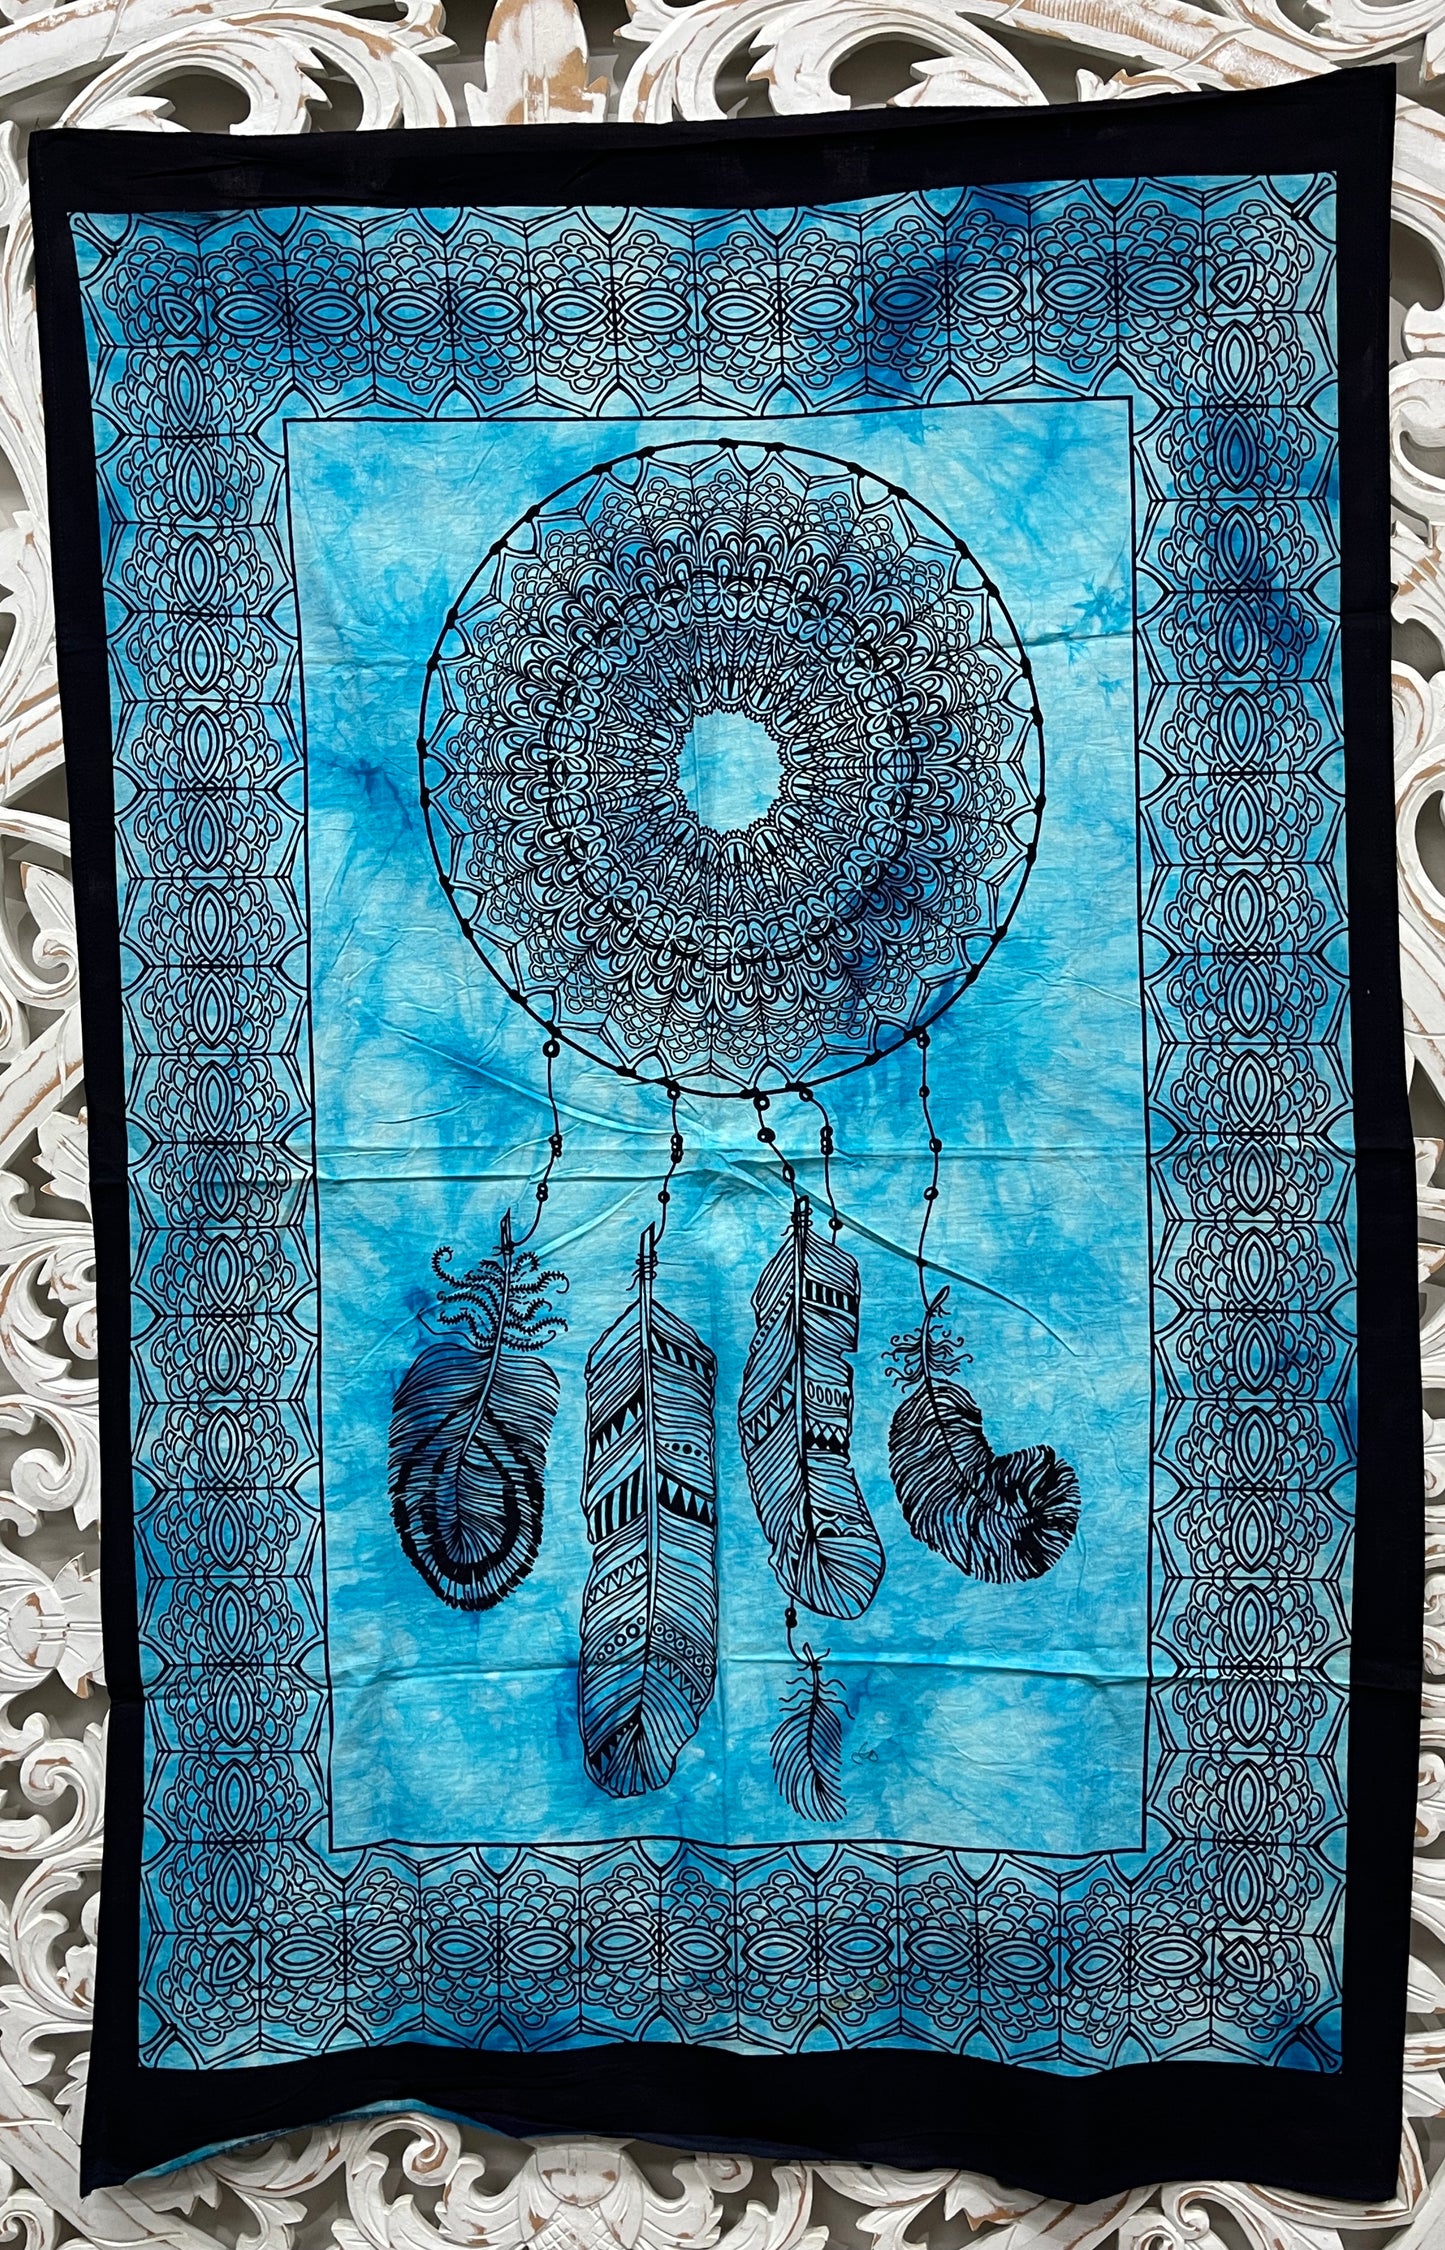 Hand printed Fabric Poster Dreamcatcher Tapestries Wall Hangings | 5 Colors